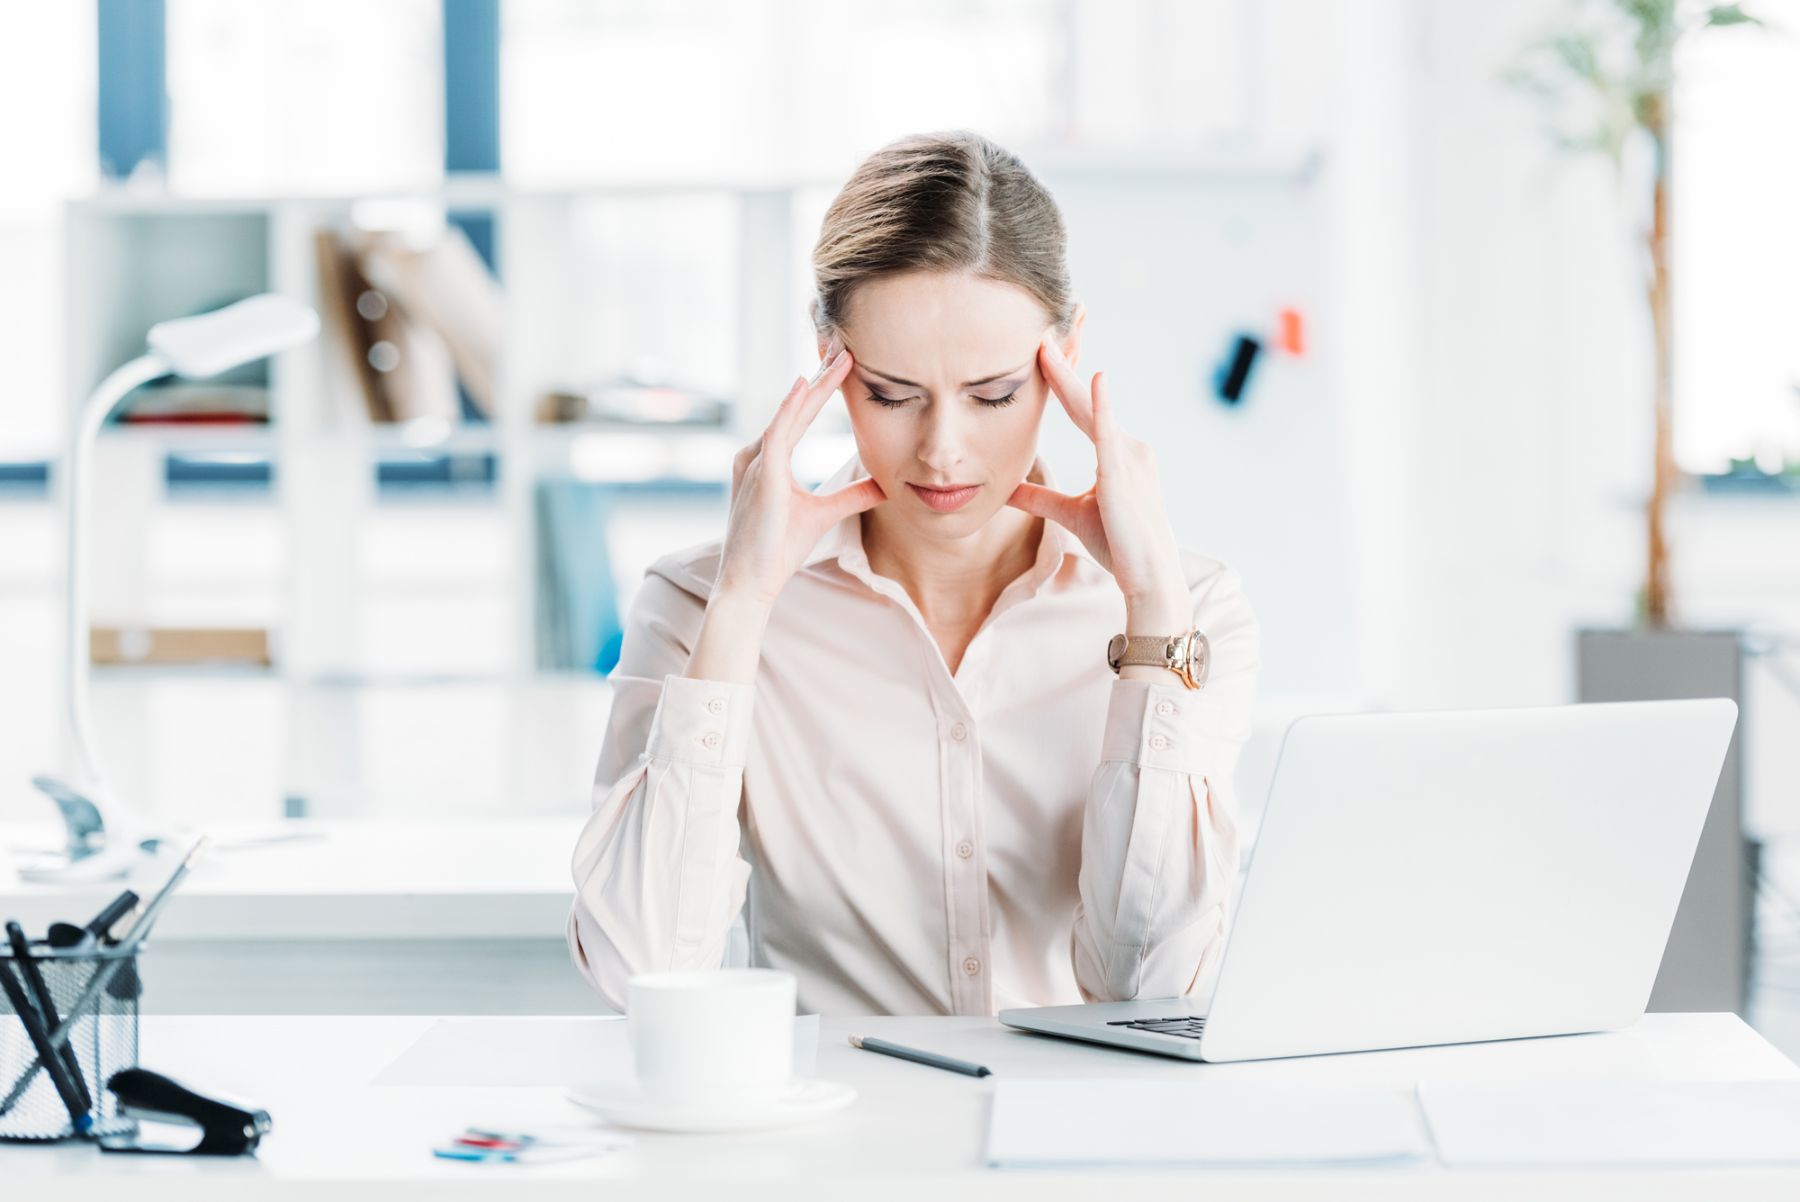 How to reduce employee stress when the workplace changes